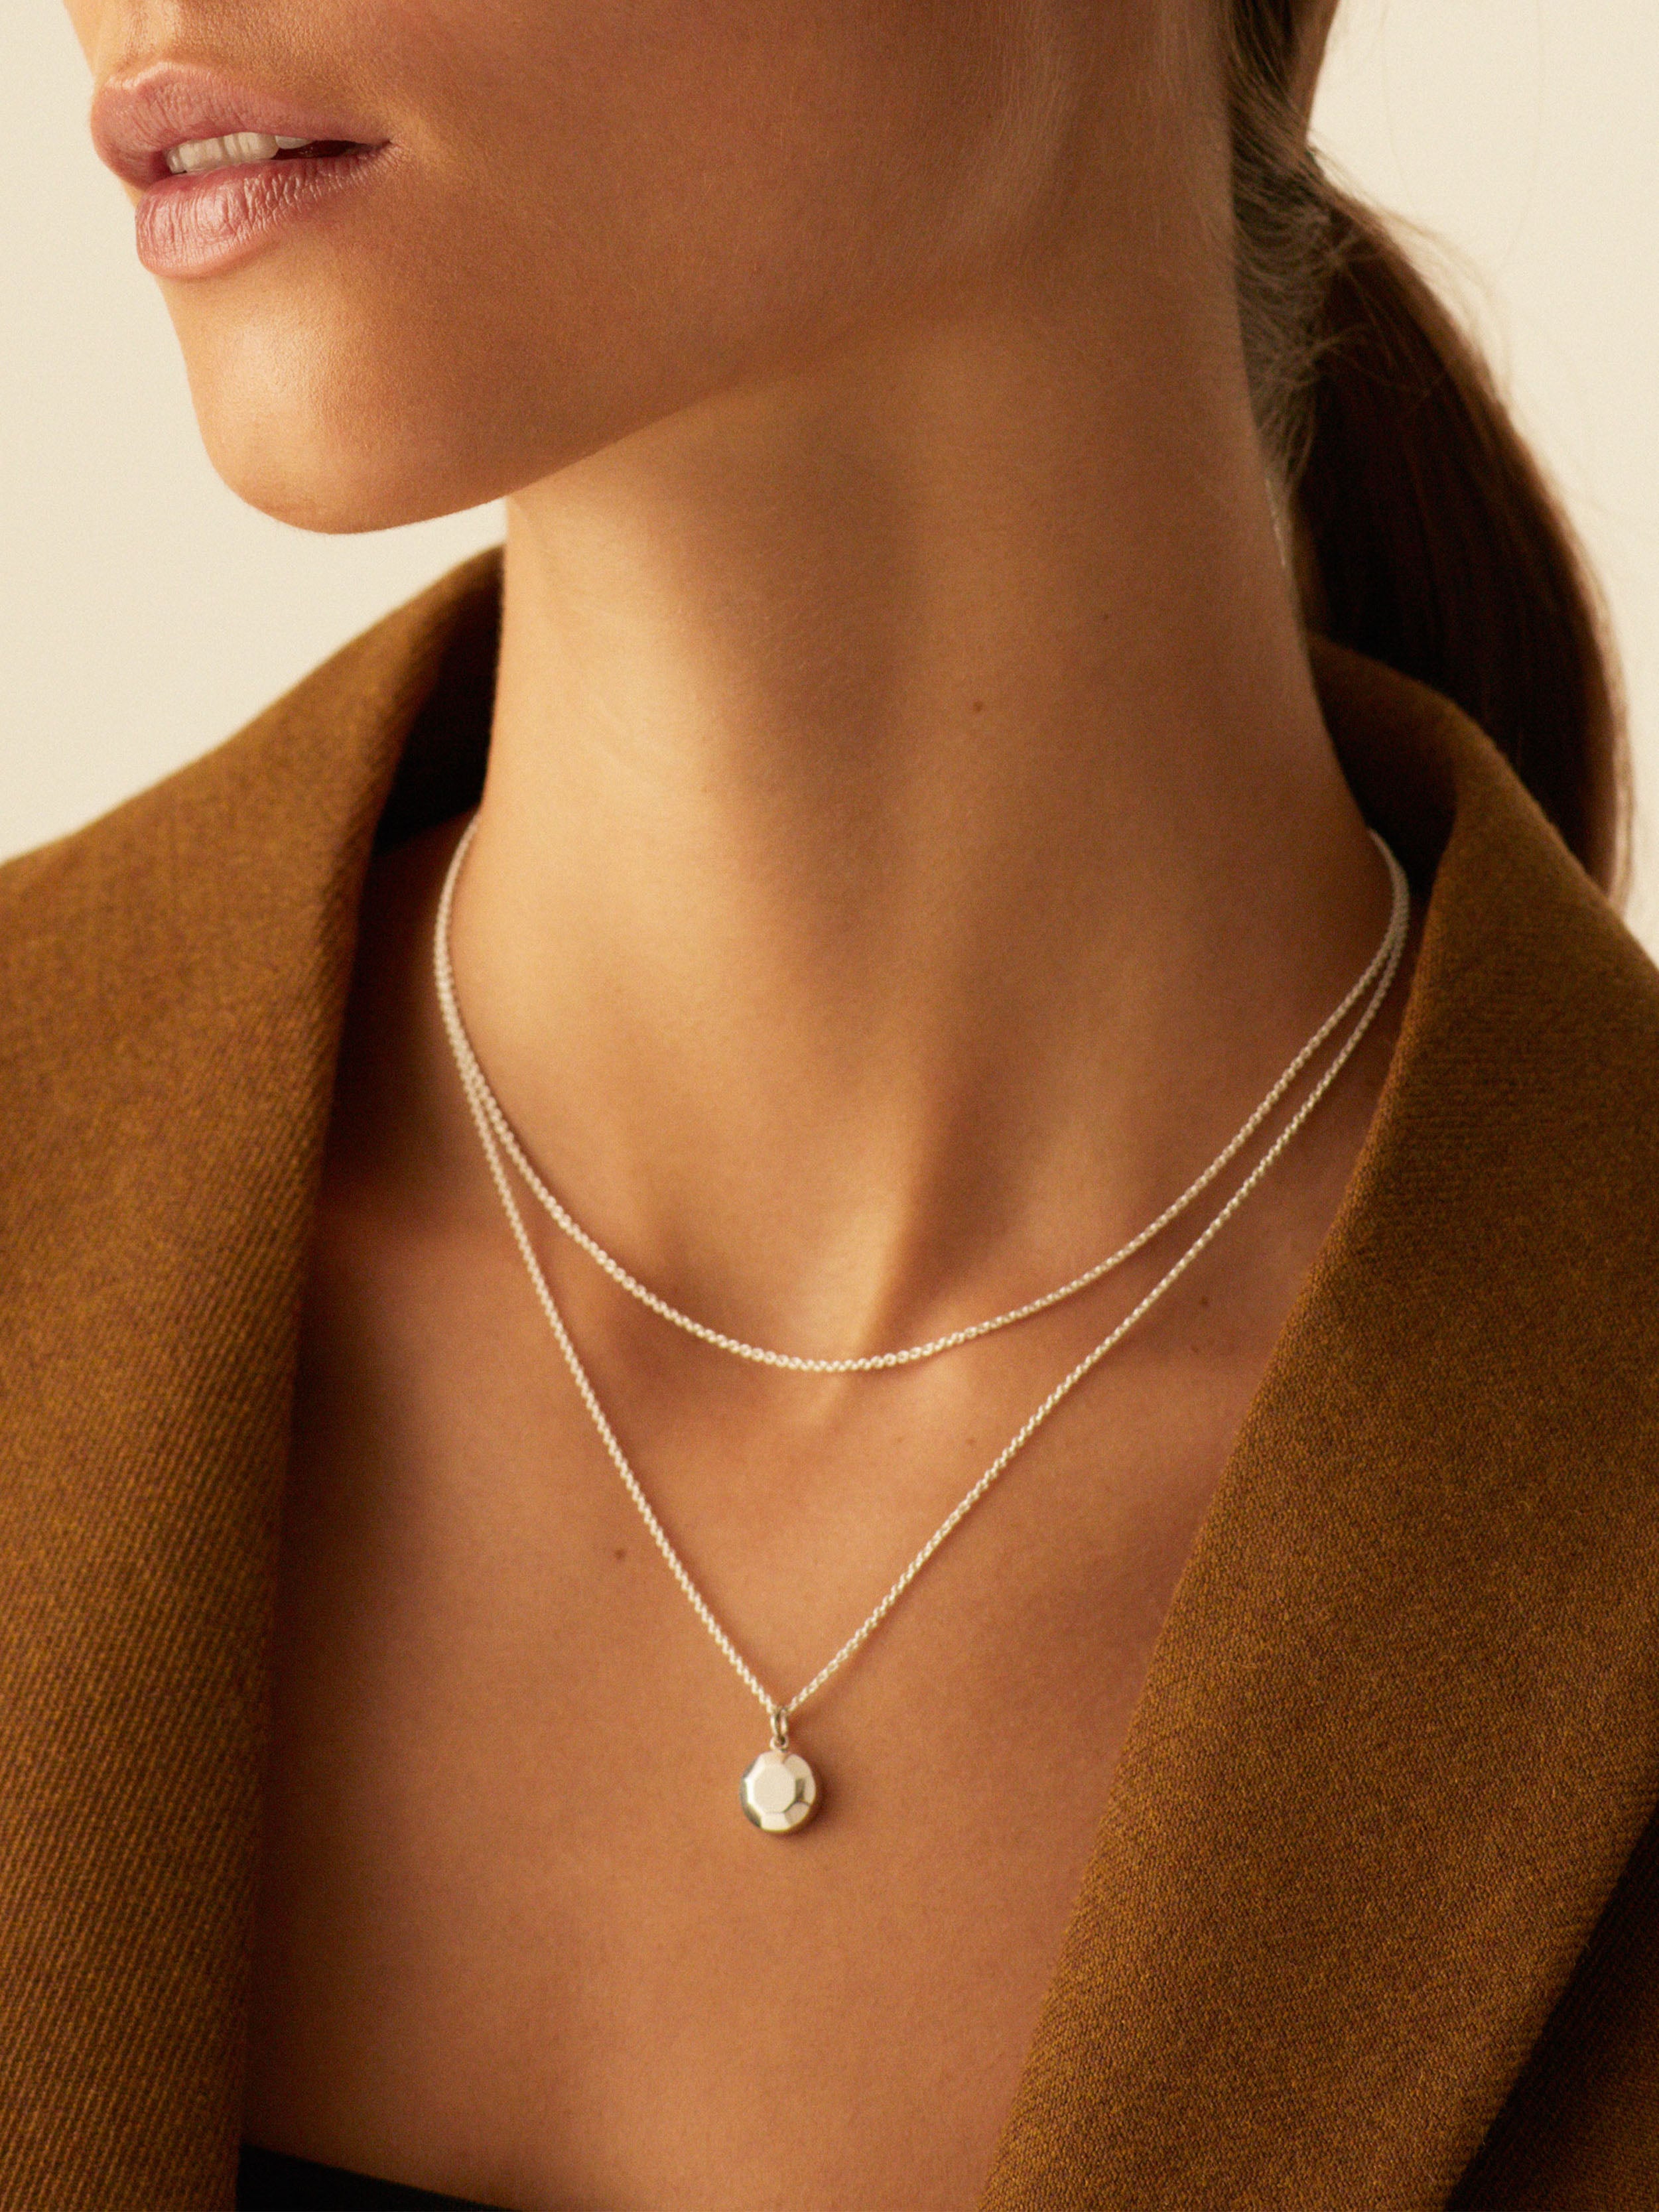 KINRADEN APS WHO MAY Necklace - sterling silver Necklaces